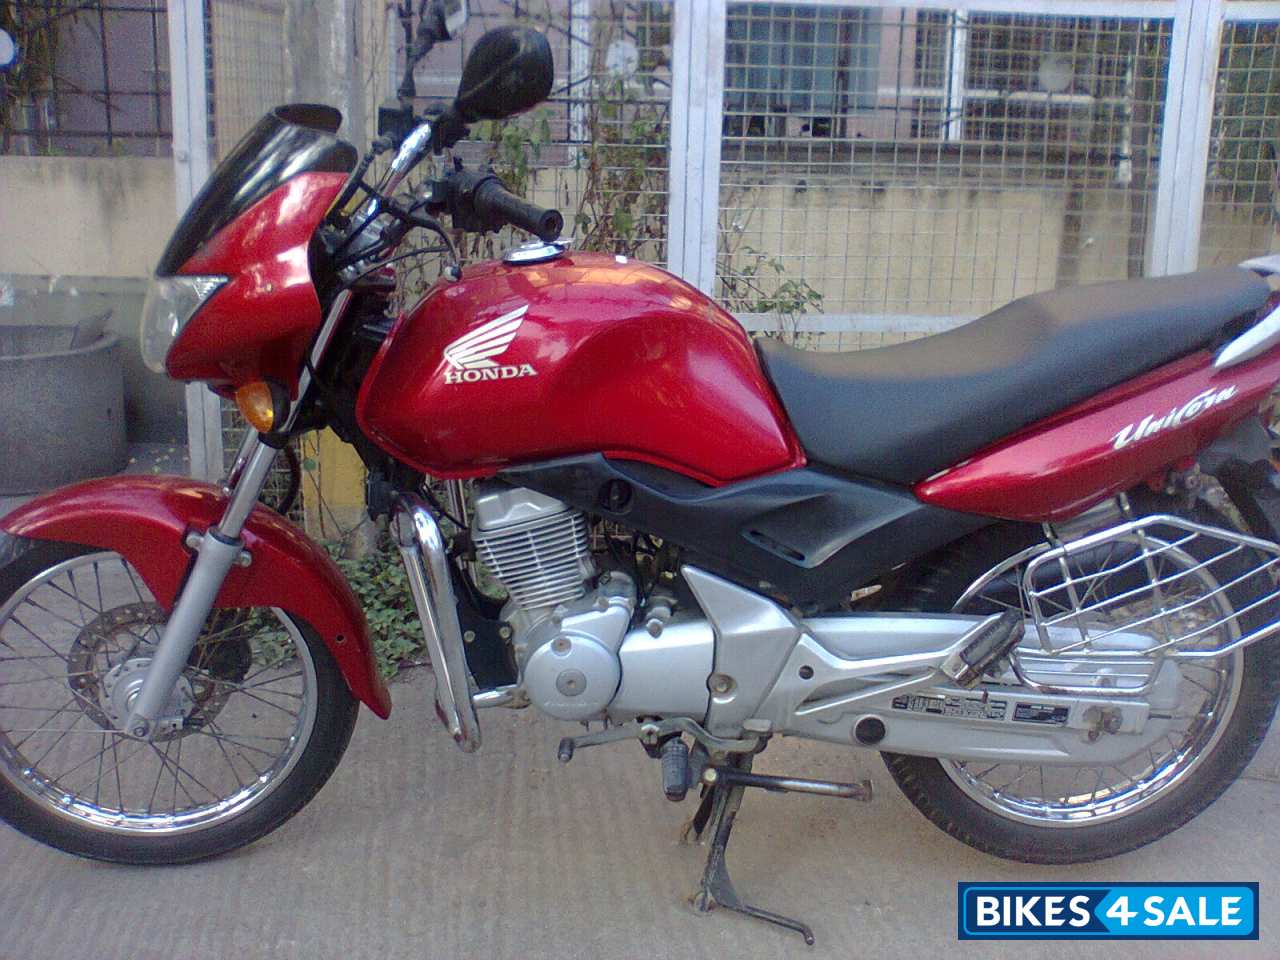 Used 2005 model Honda Unicorn for sale in Bangalore. ID 69107. Red